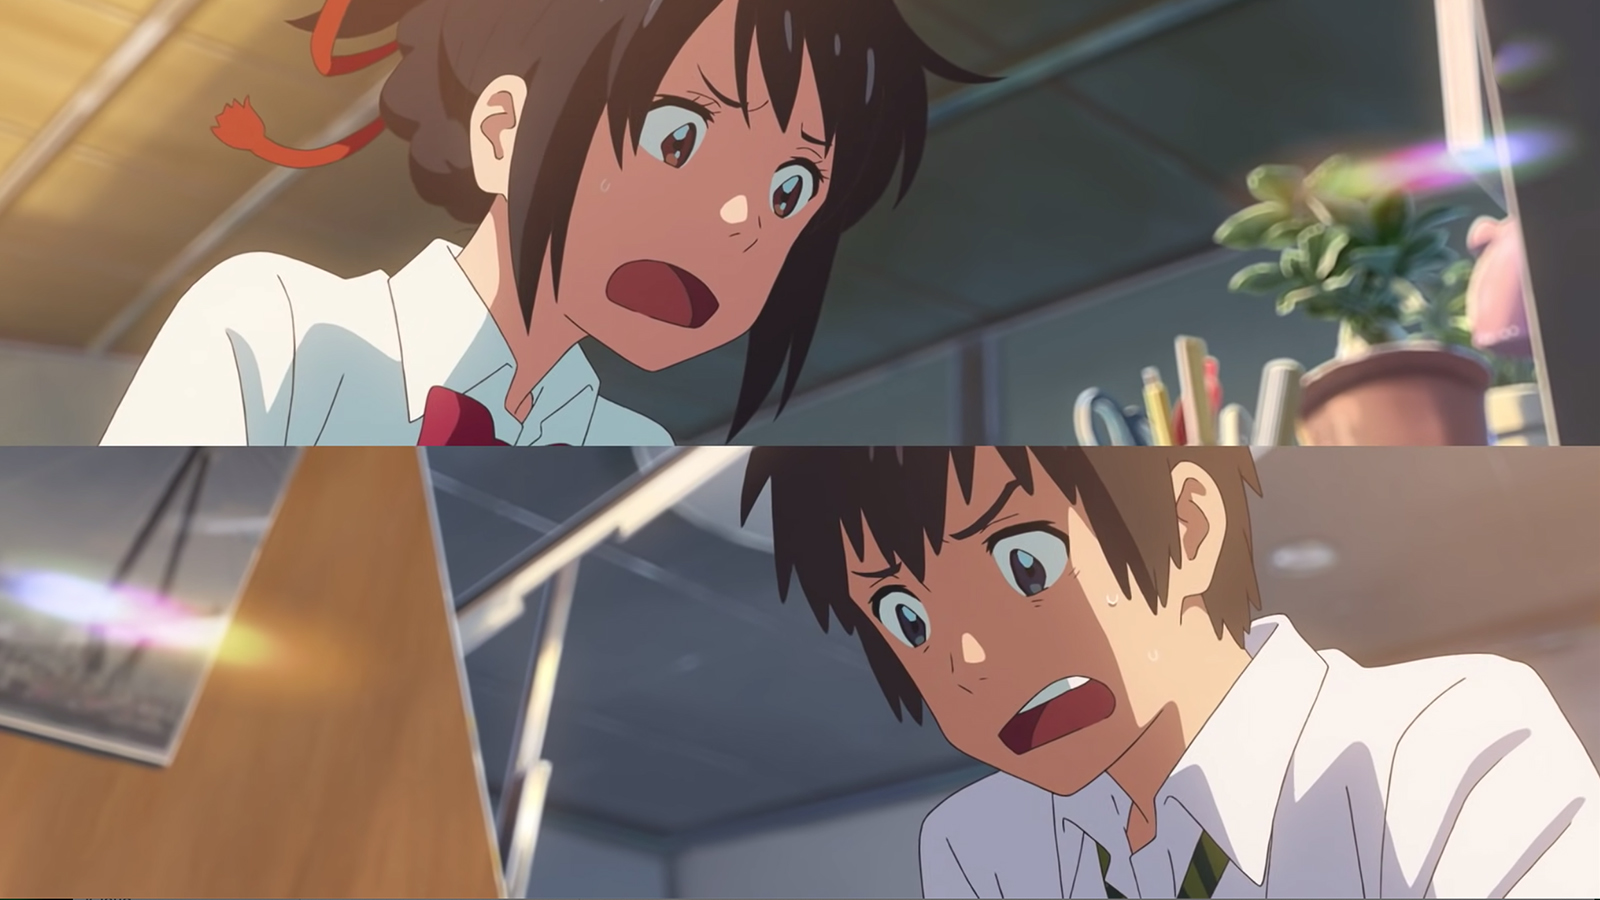 A scene from "Your Name." Screen grab